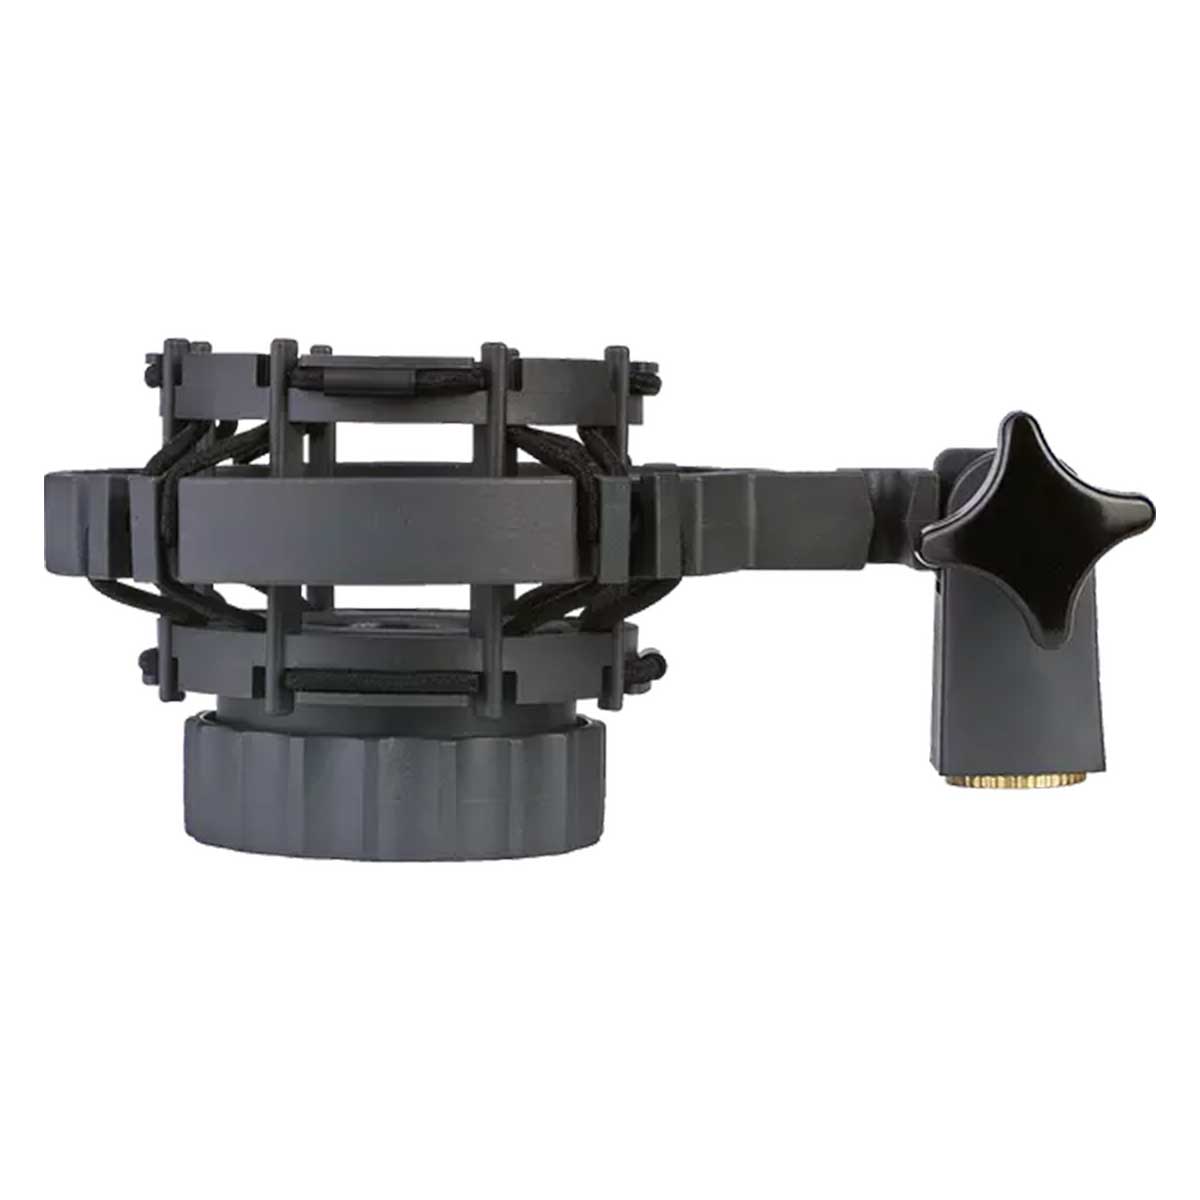 Universal shock mount for microphones with shaft diameters from 19mm to 26mm (3/4" to 1")